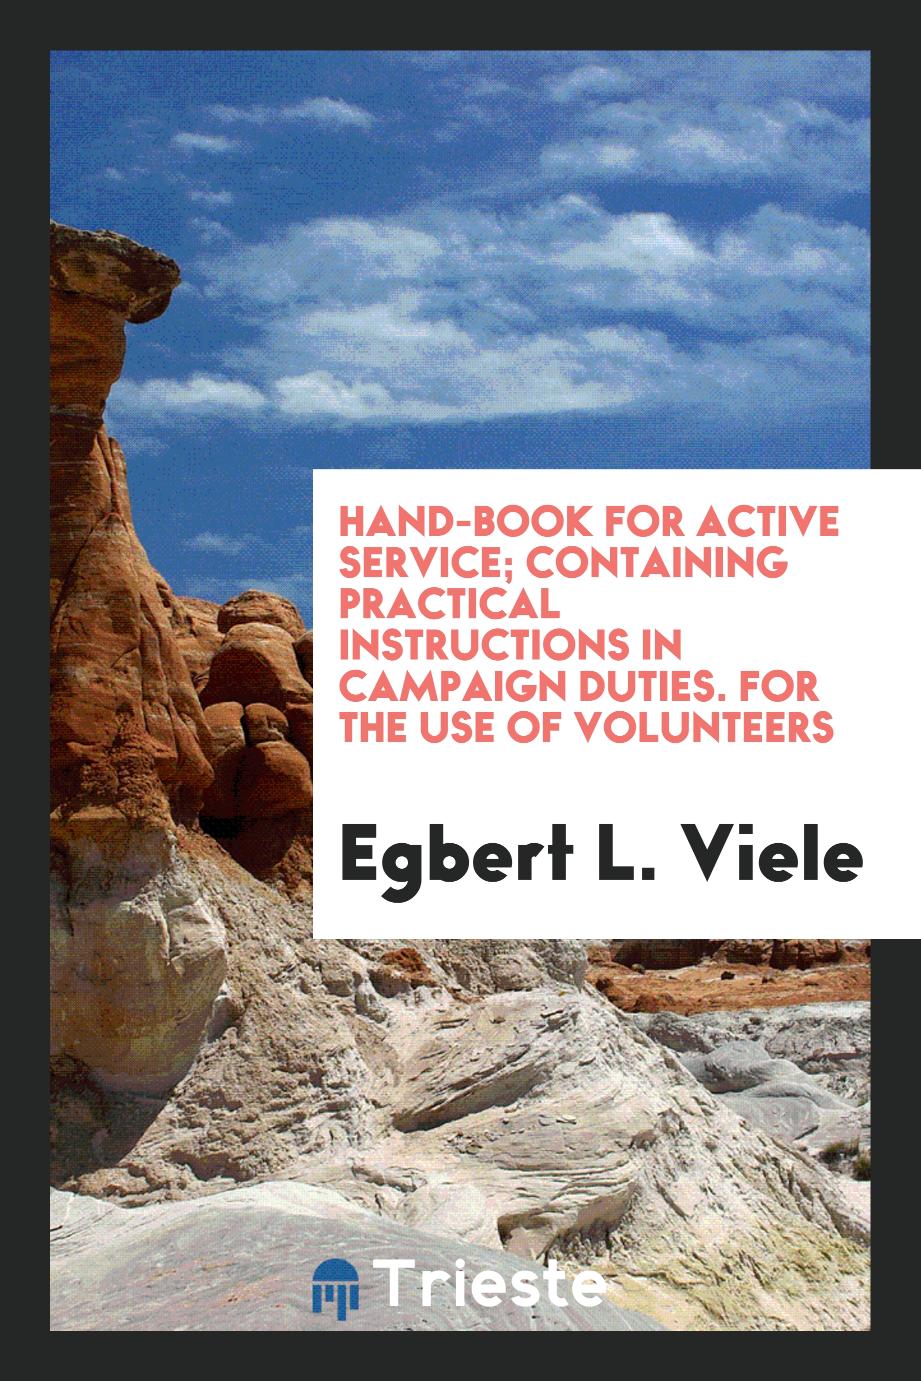 Hand-book for active service; containing practical instructions in campaign duties. For the use of volunteers